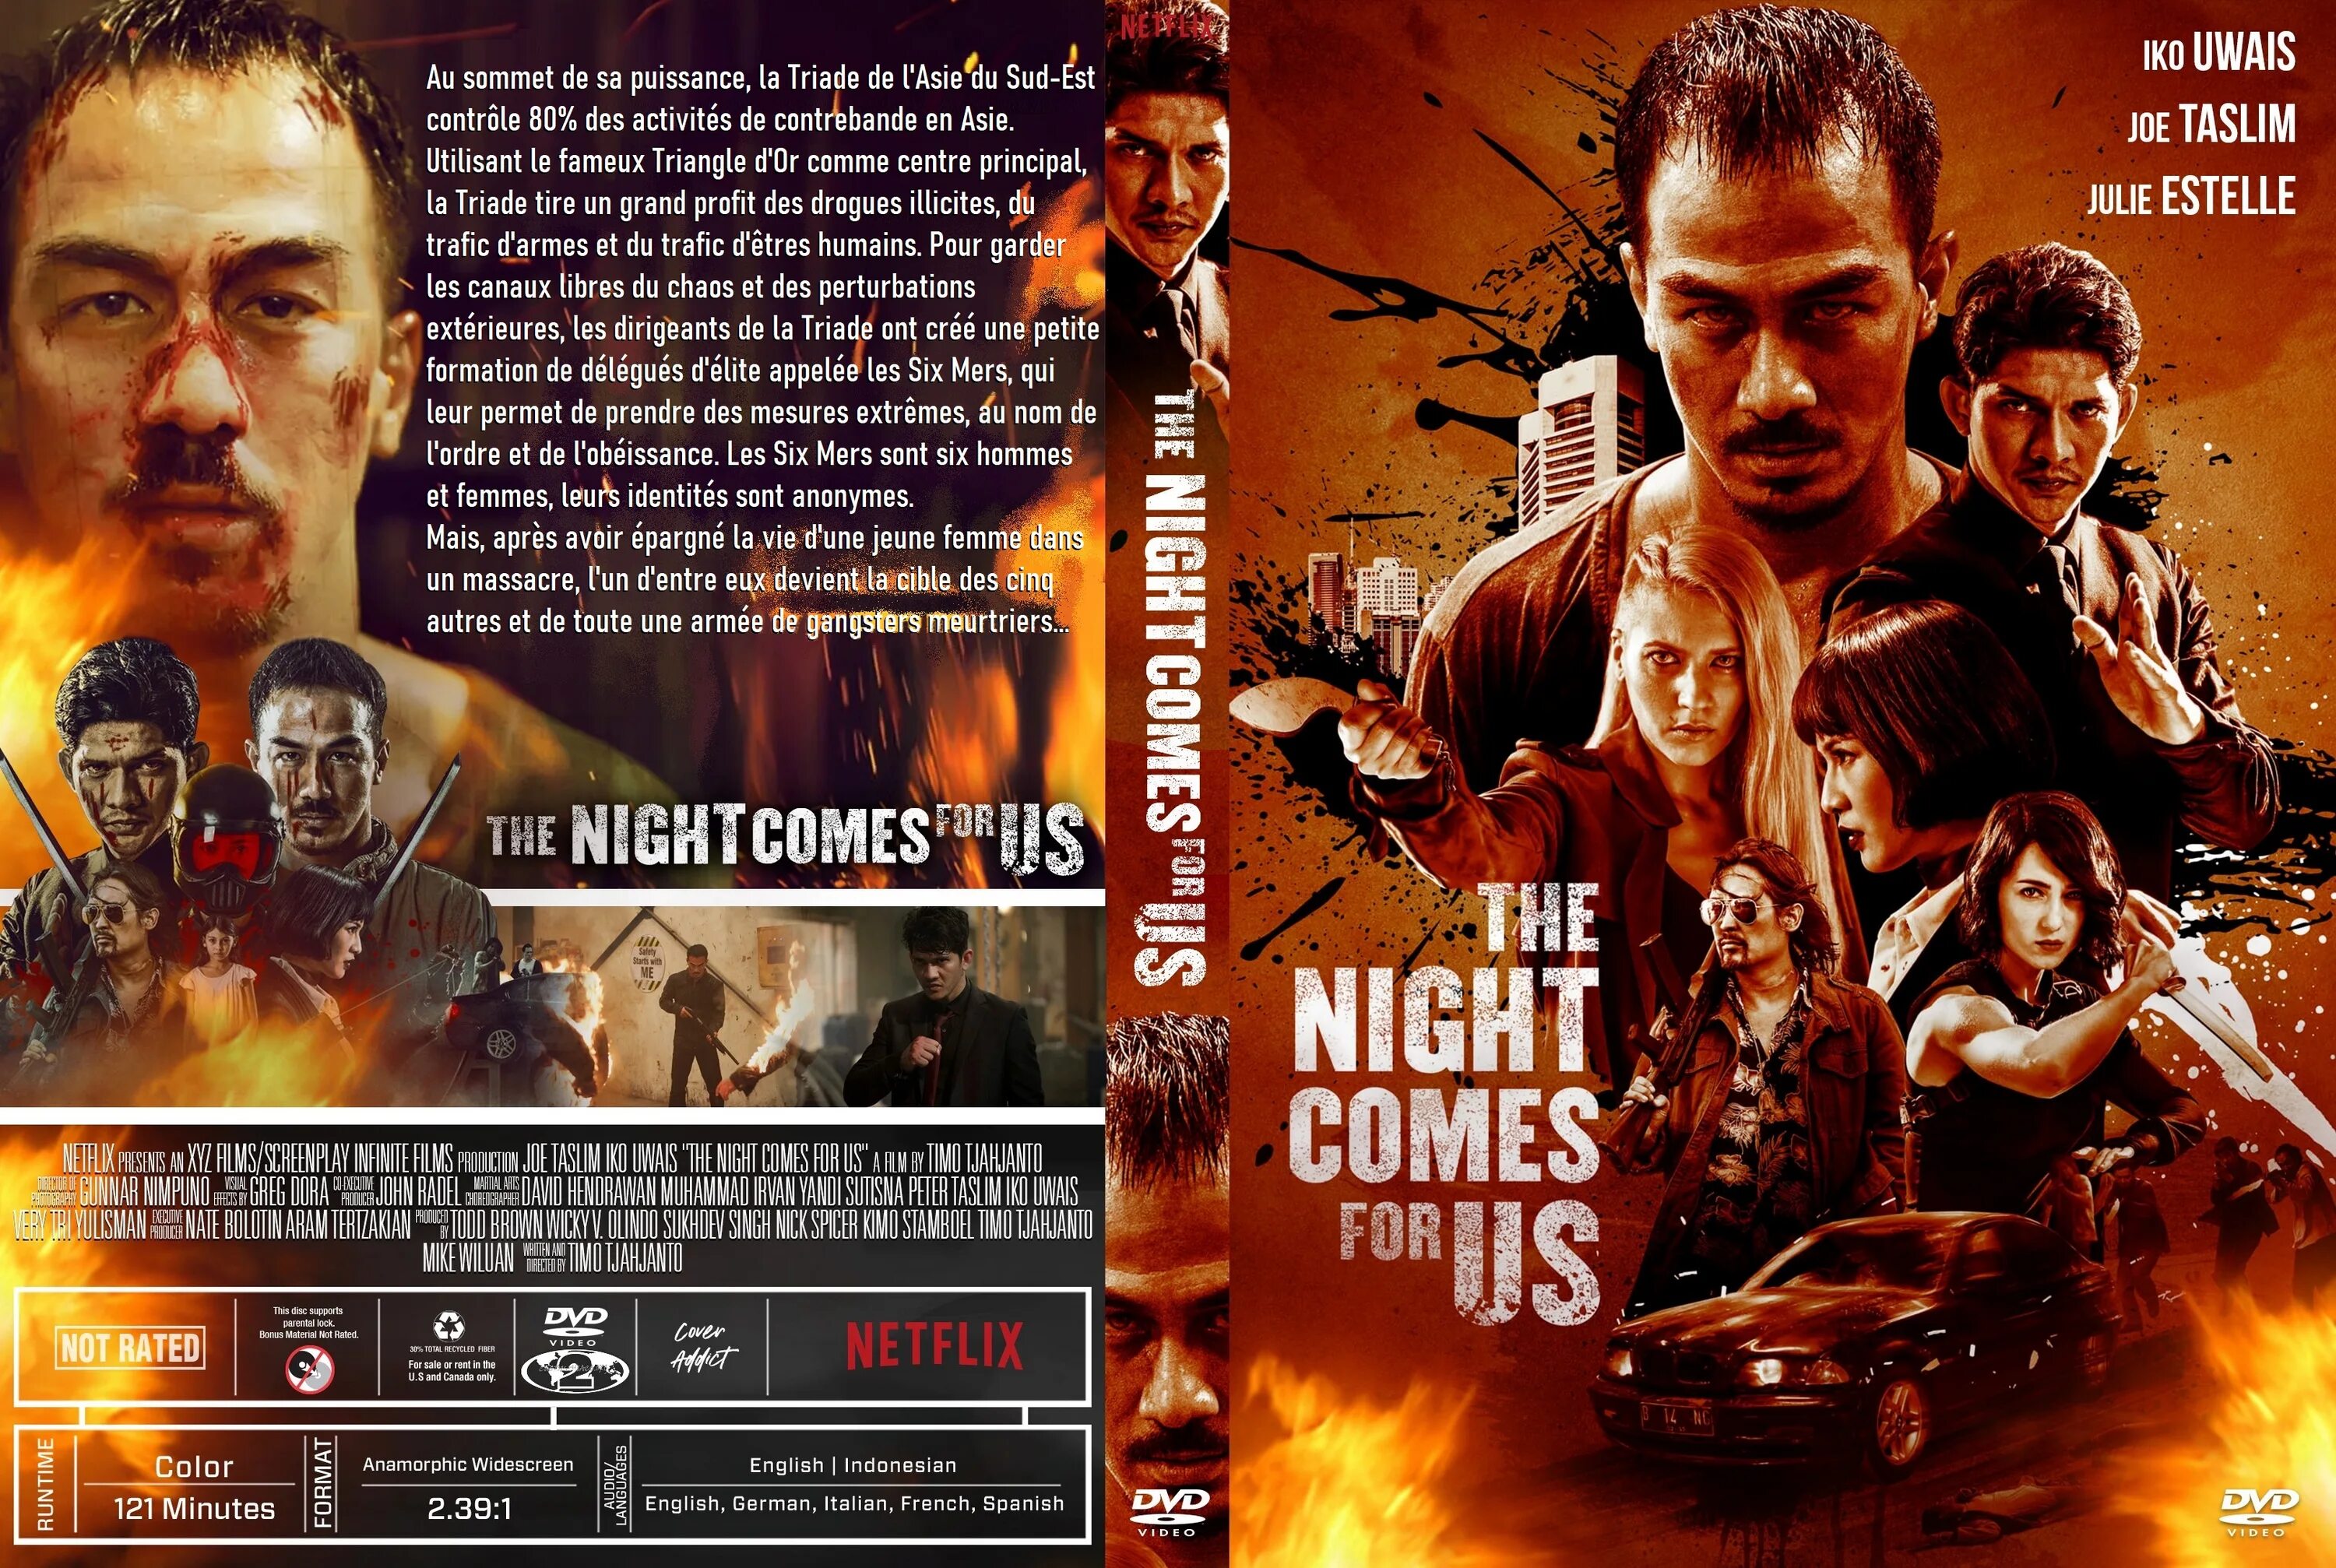 He comes in the night. Ночь идёт за нами (2018). The Night comes for us 2018. Ночь идет за нами 2018 Julie Estelle. The Night comes for us poster.